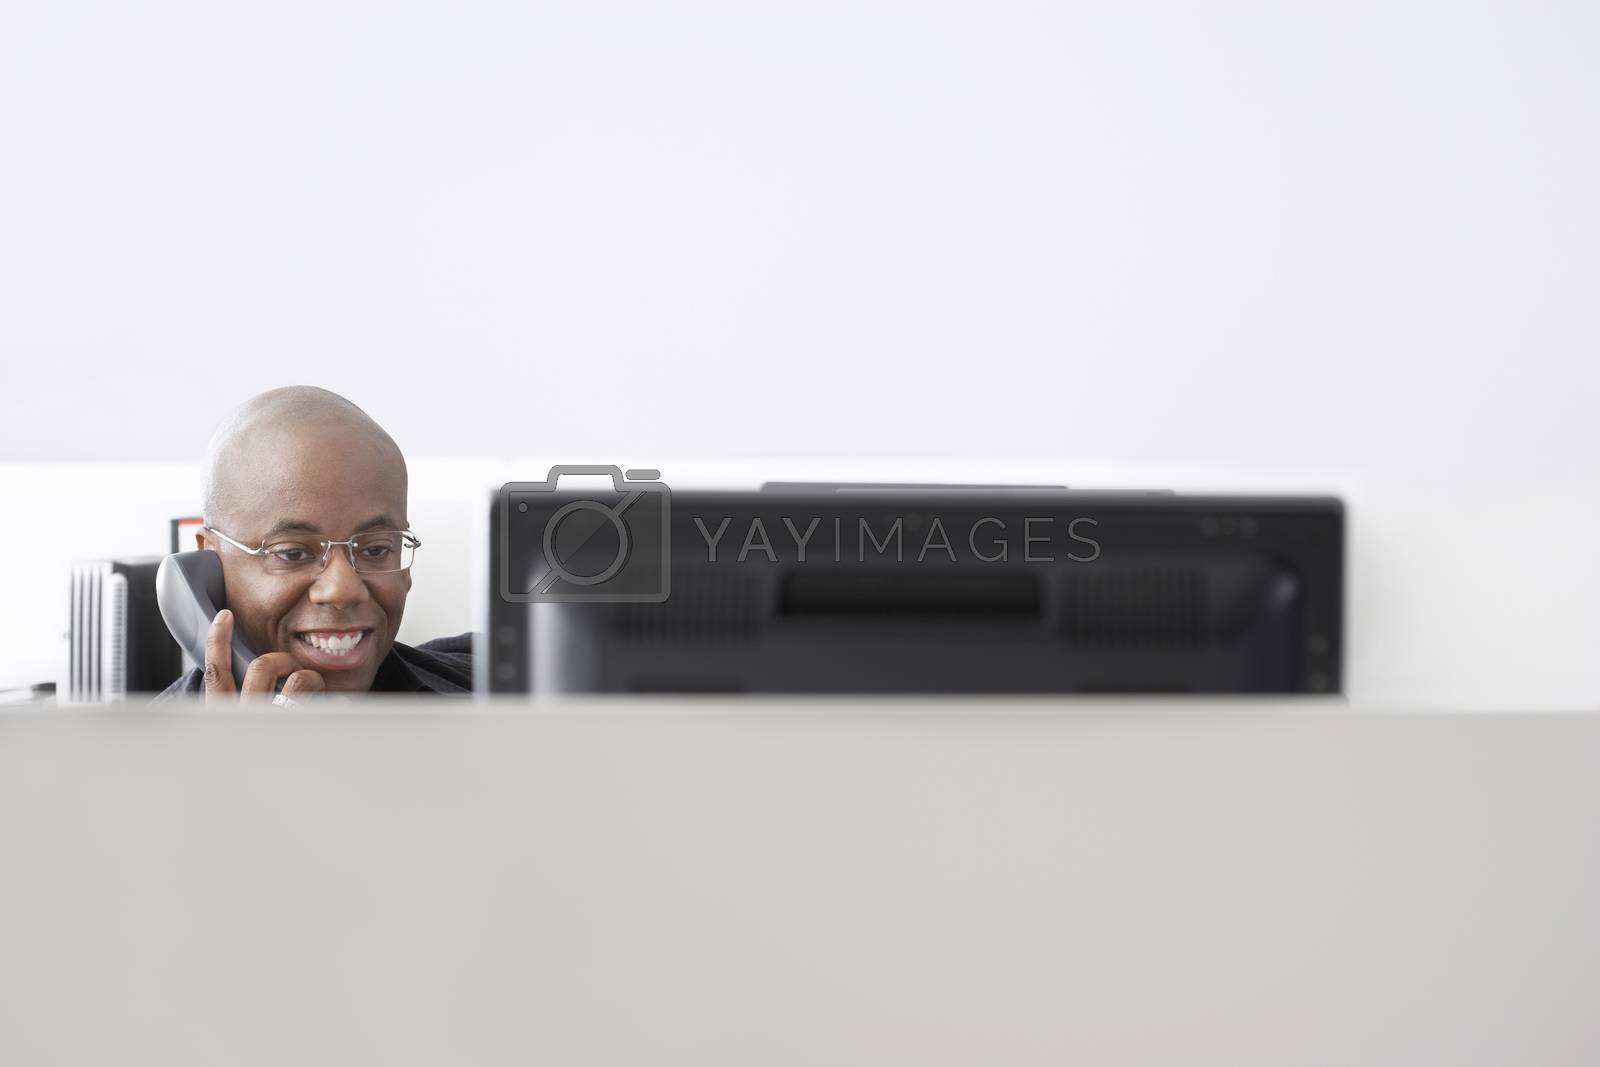 Royalty free image of Smiling African American businessman using telephone at computer desk by moodboard